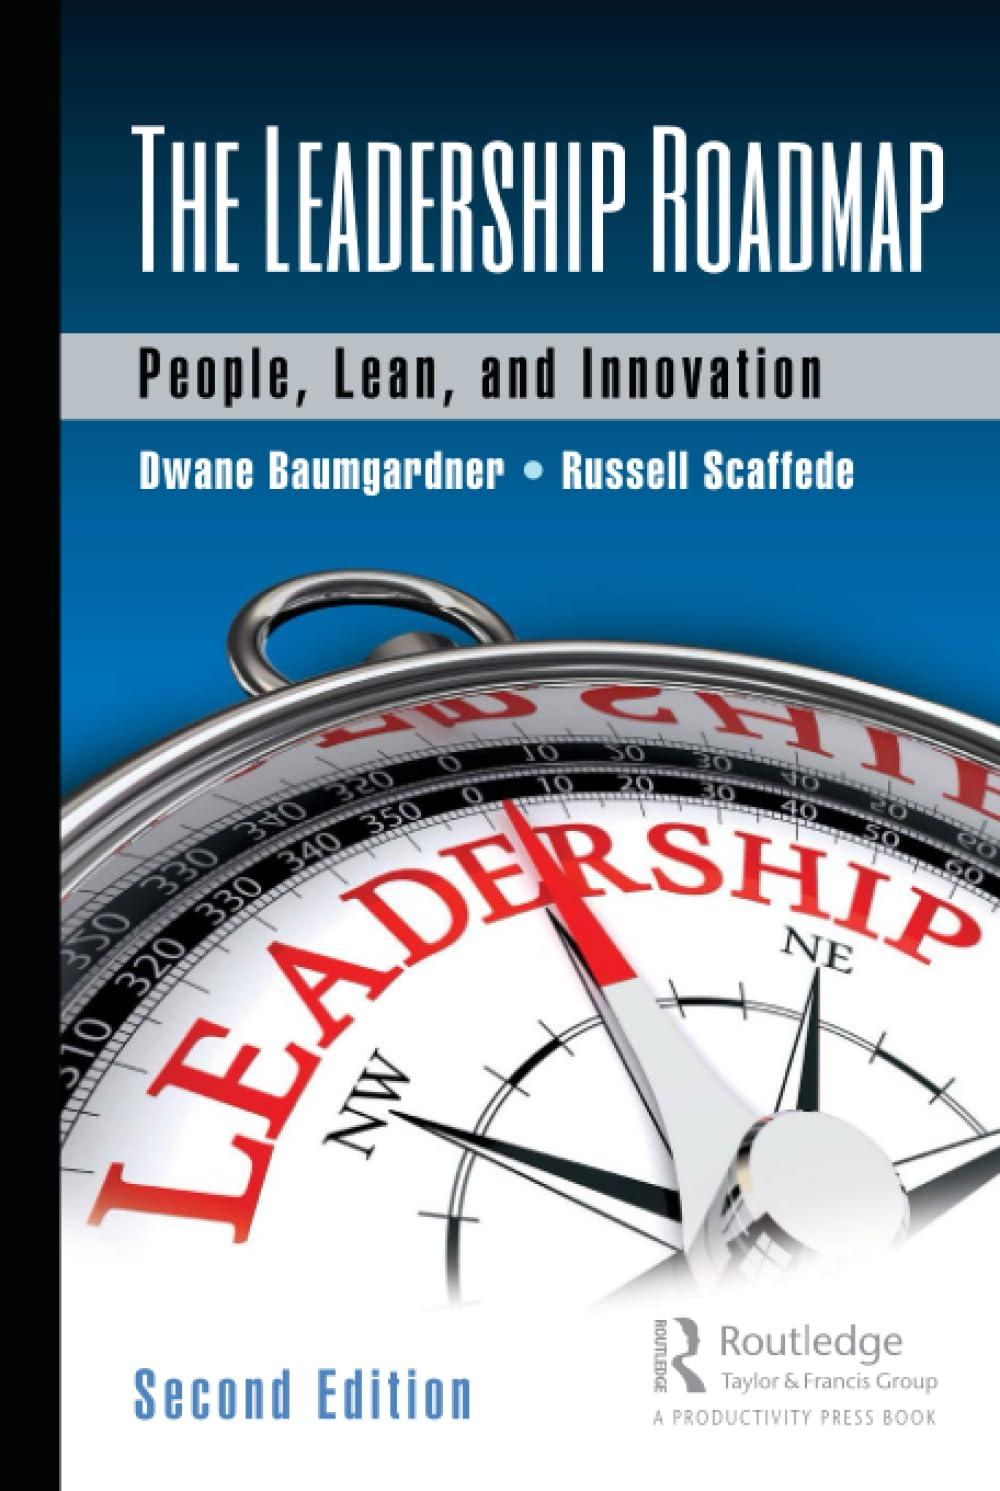 the leadership roadmap people lean and innovation 2nd edition dwane baumgardner, russell scaffede